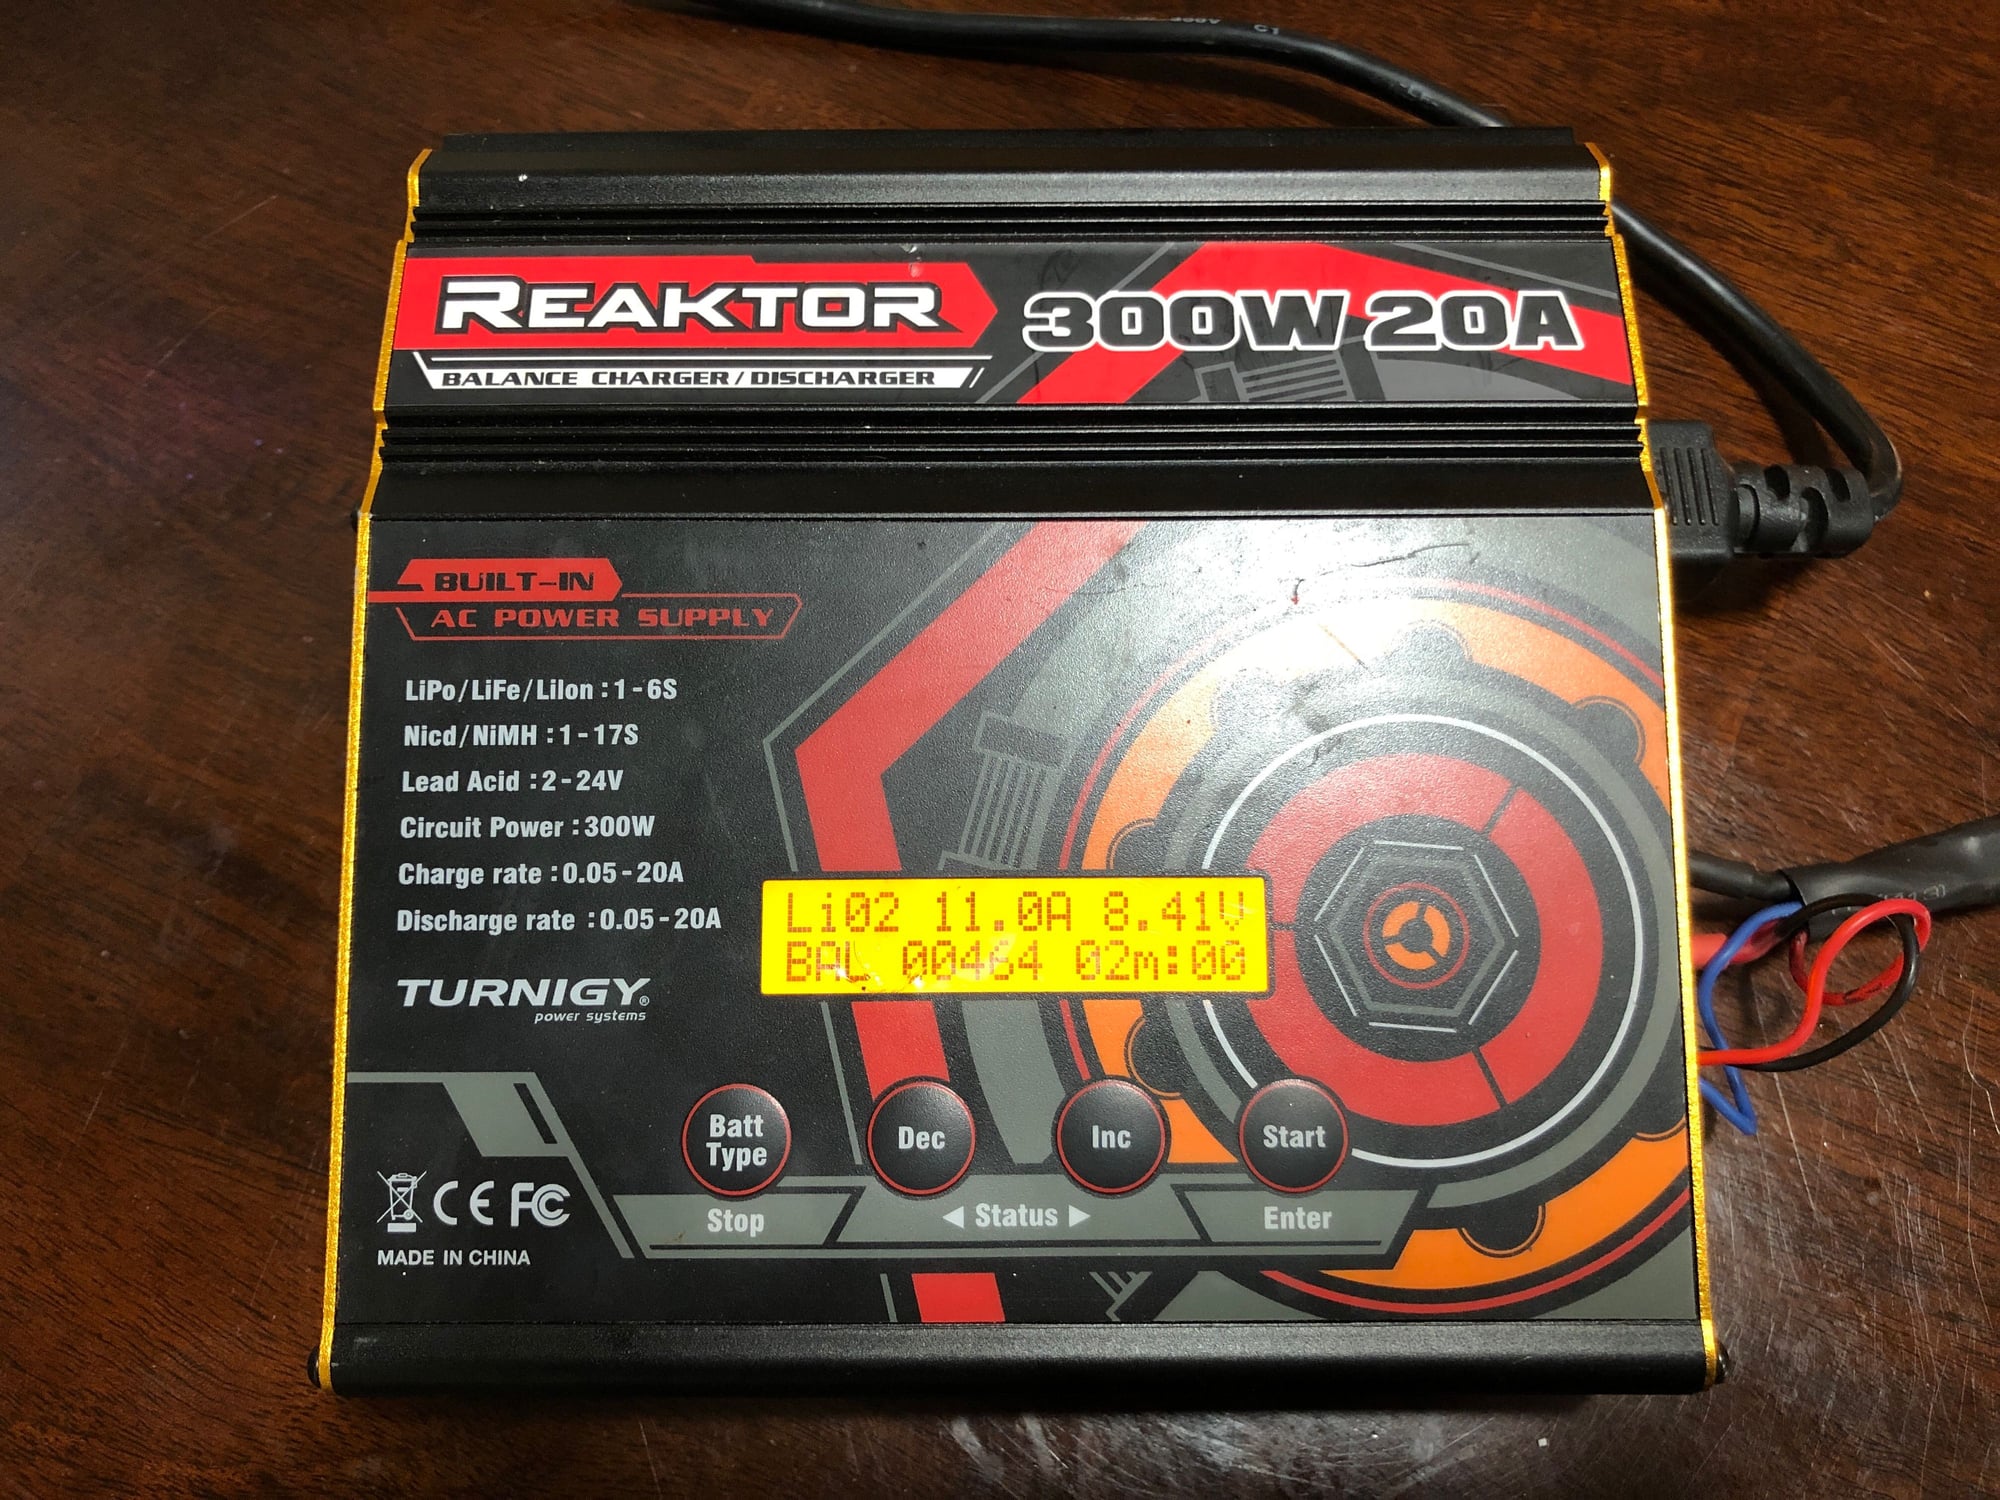 Turnigy Reaktor 300w 20A Charger AC/DC - R/C Tech Forums